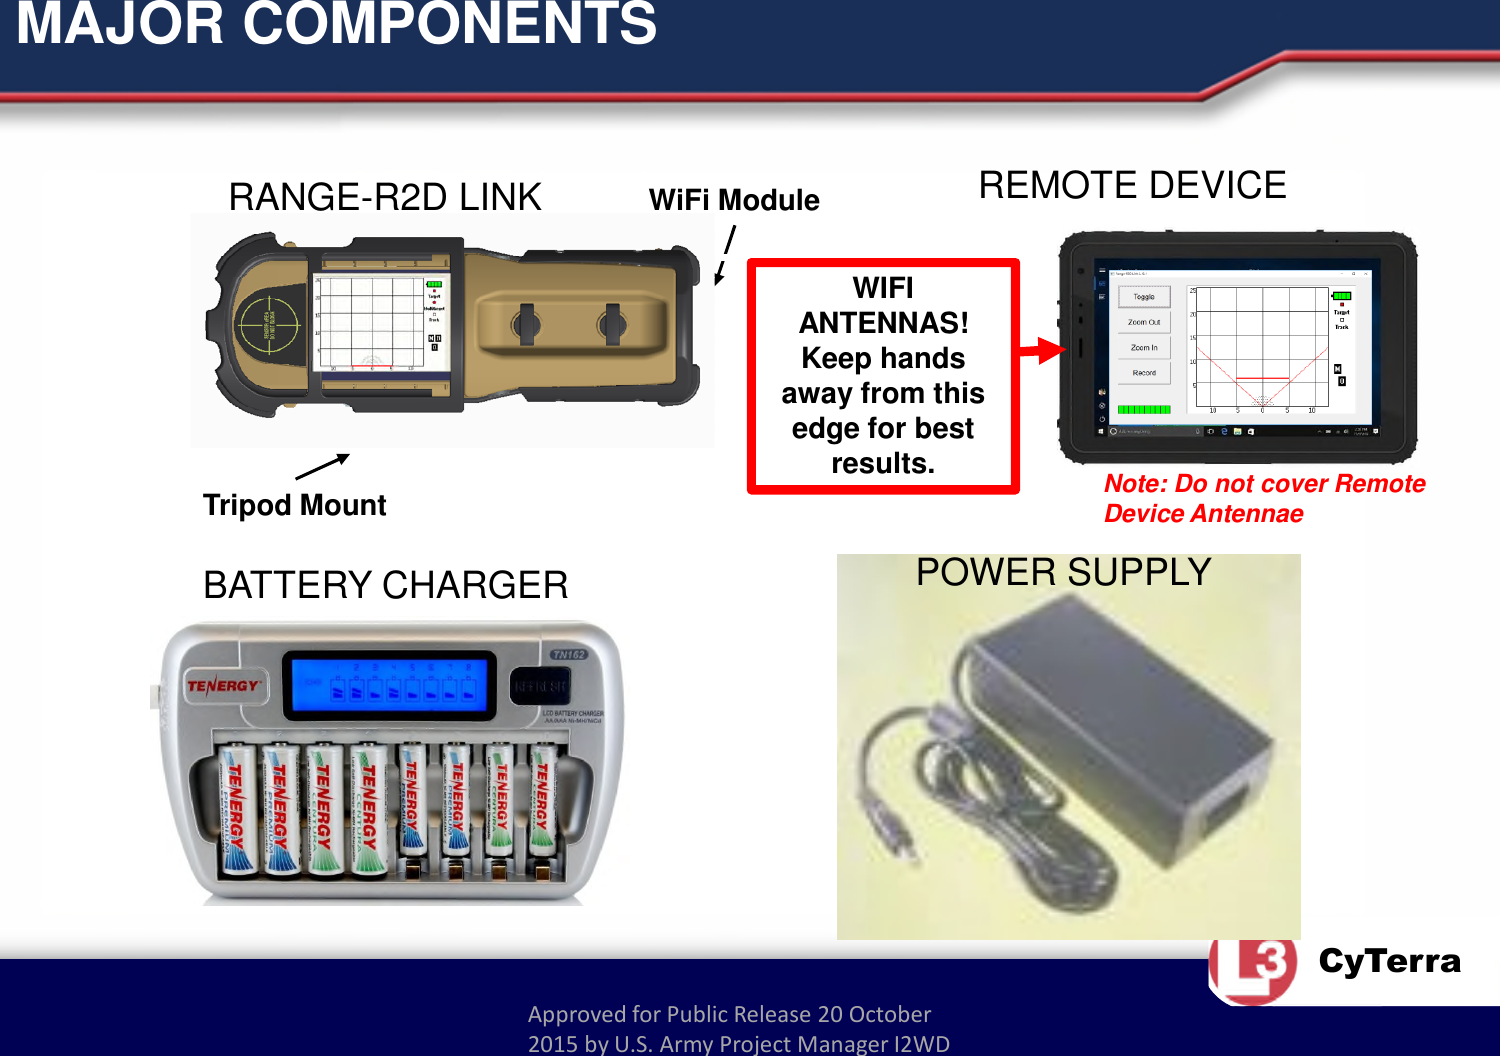 Approved for Public Release 20 October 2015 by U.S. Army Project Manager I2WDCyTerraMAJOR COMPONENTSWiFi ModuleRANGE-R2D LINK REMOTE DEVICEBATTERY CHARGER POWER SUPPLYTripod Mount Note: Do not cover Remote Device AntennaeWIFI ANTENNAS!Keep hands away from this edge for best results.